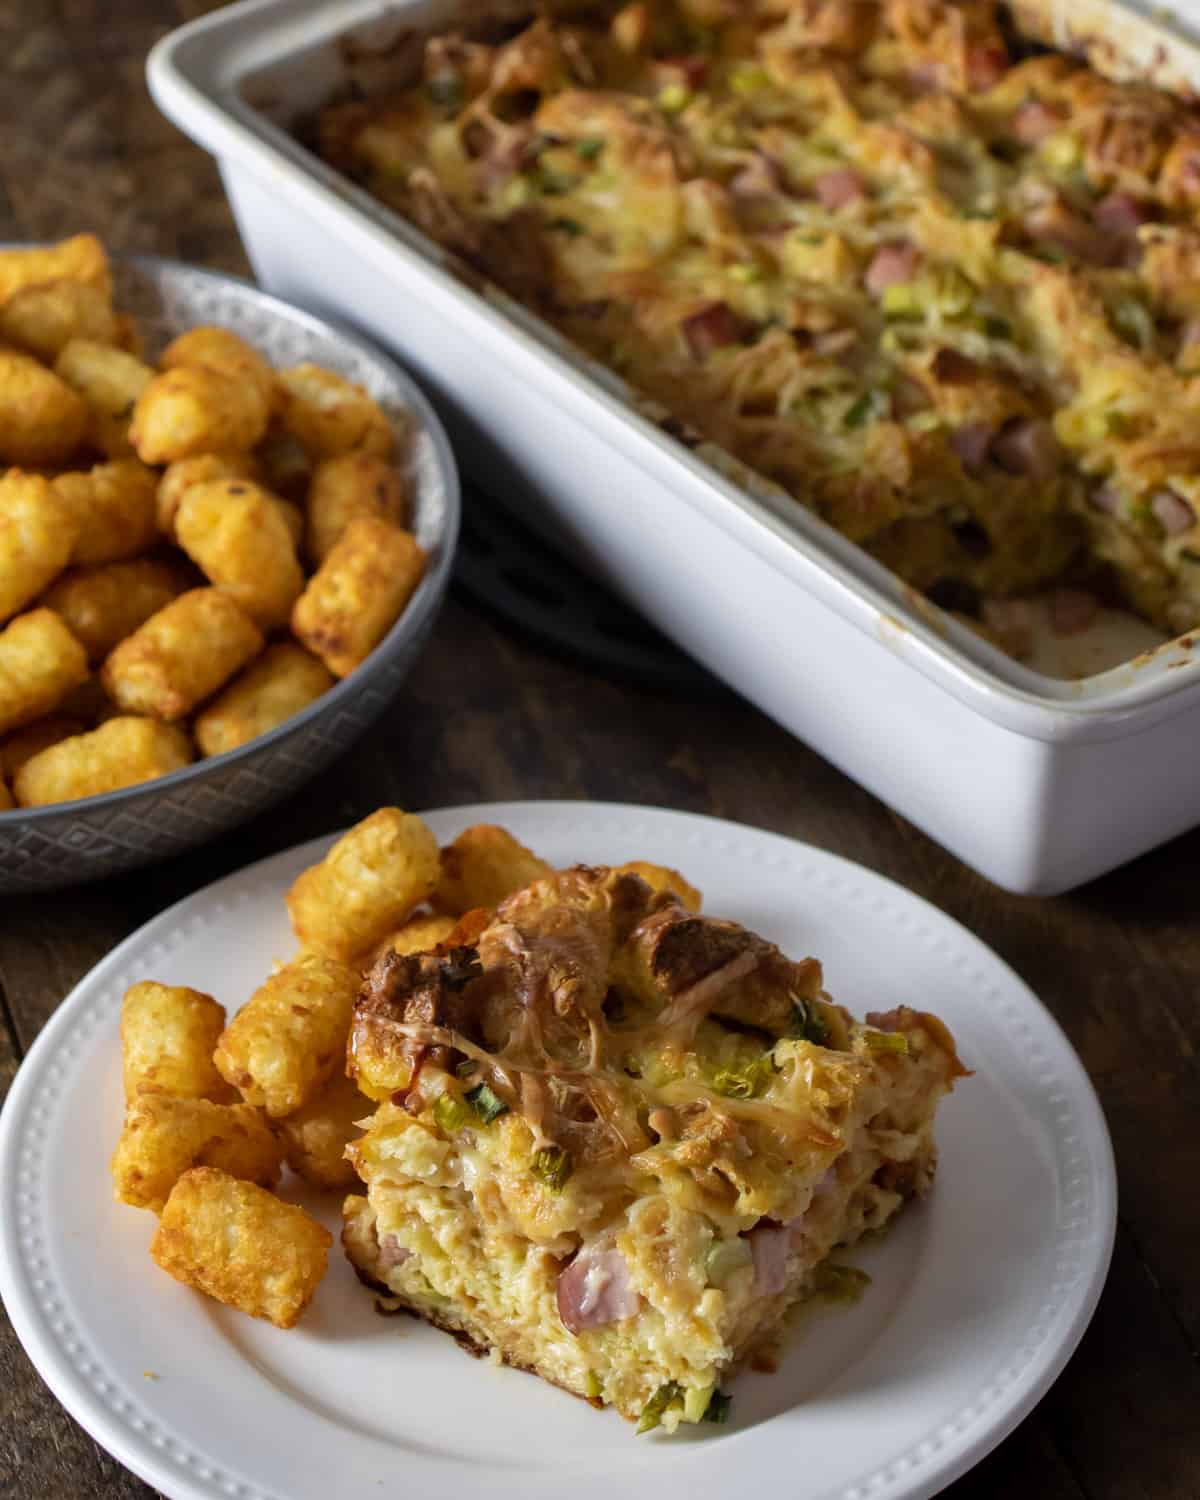 A casserole with eggs, ham and cheese on a plate with tater tots.